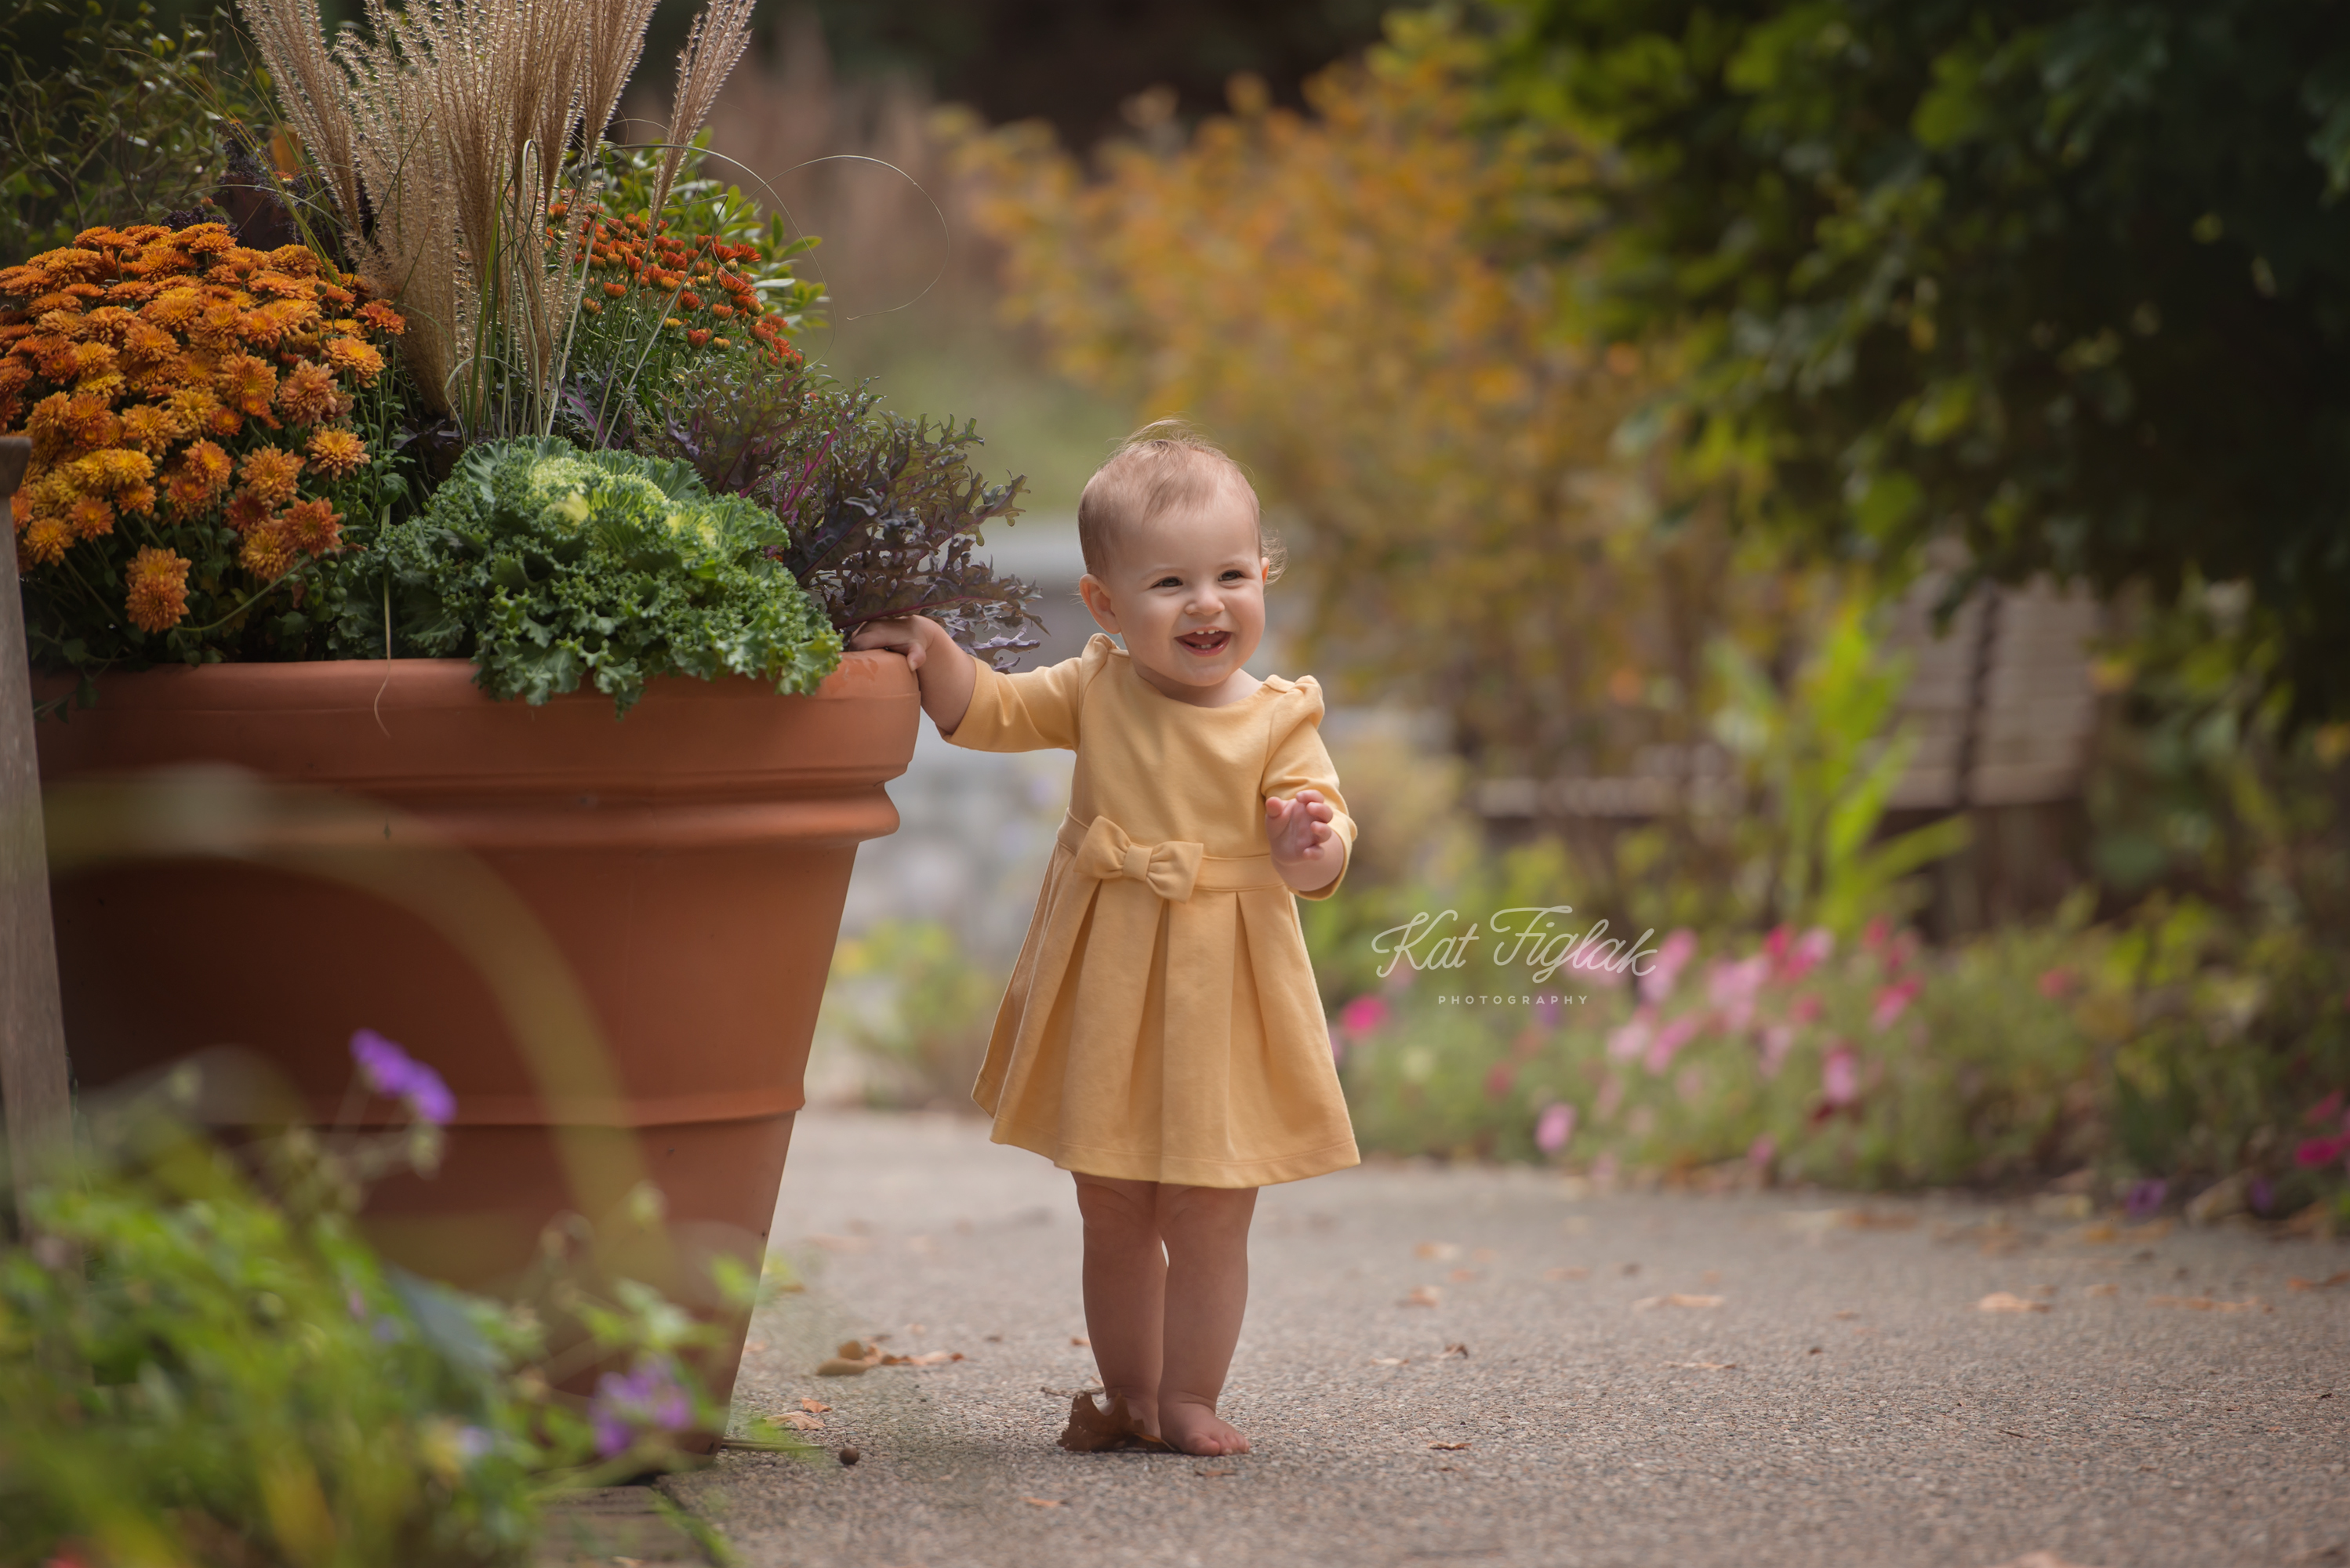 one year old baby girl smiling holding flower pot wearing a yellow dress